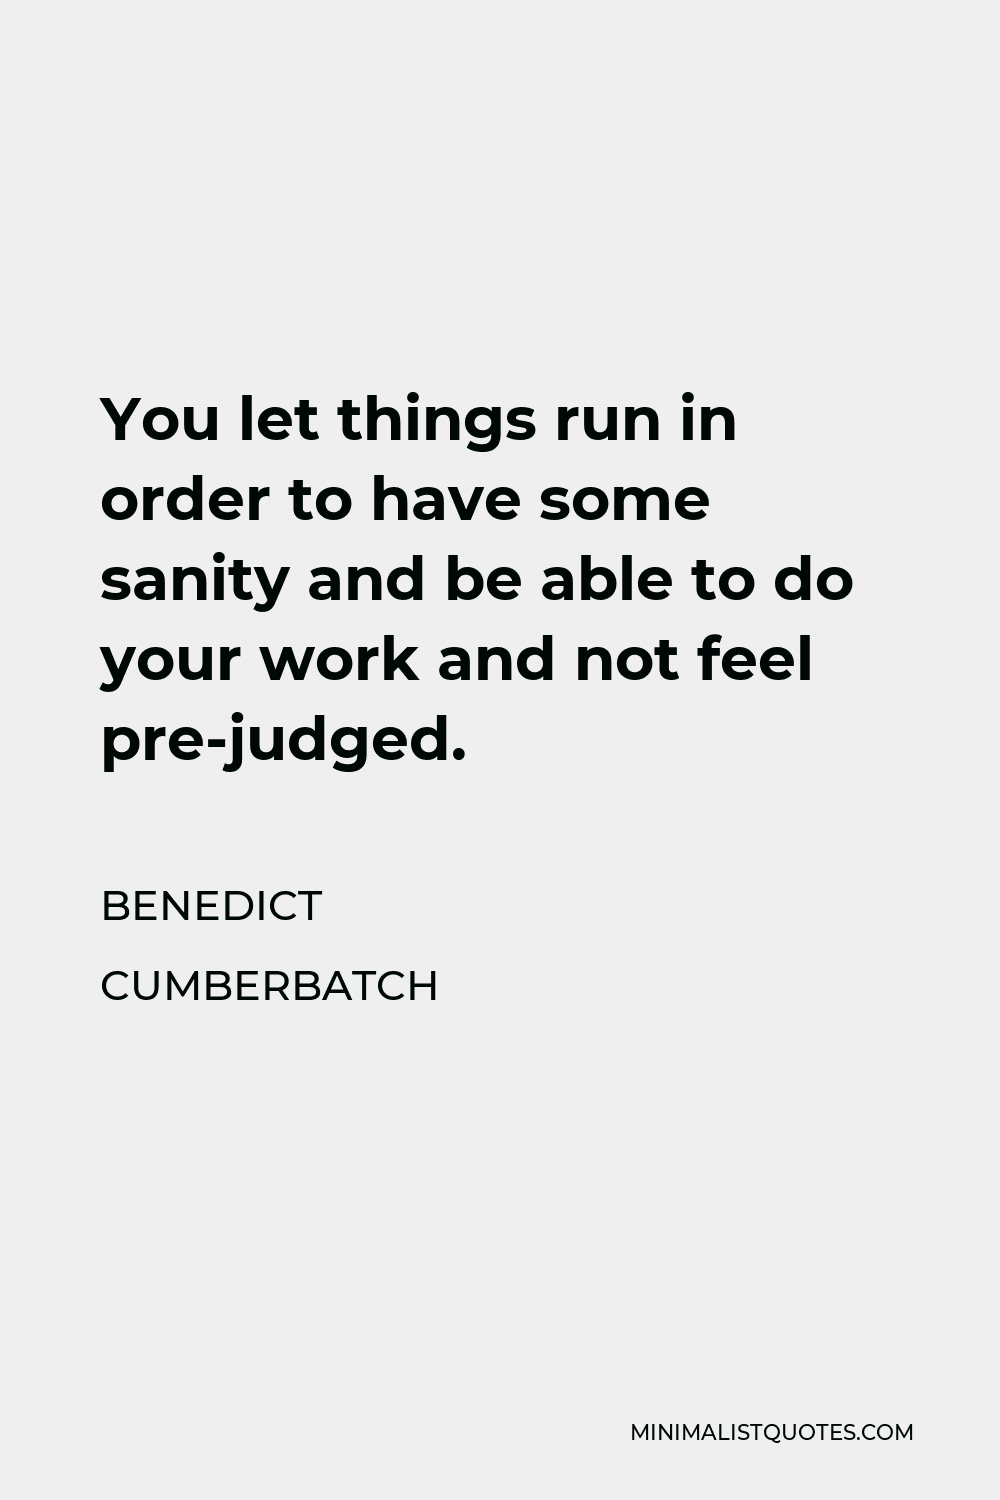 Benedict Cumberbatch Quote - You let things run in order to have some sanity and be able to do your work and not feel pre-judged.